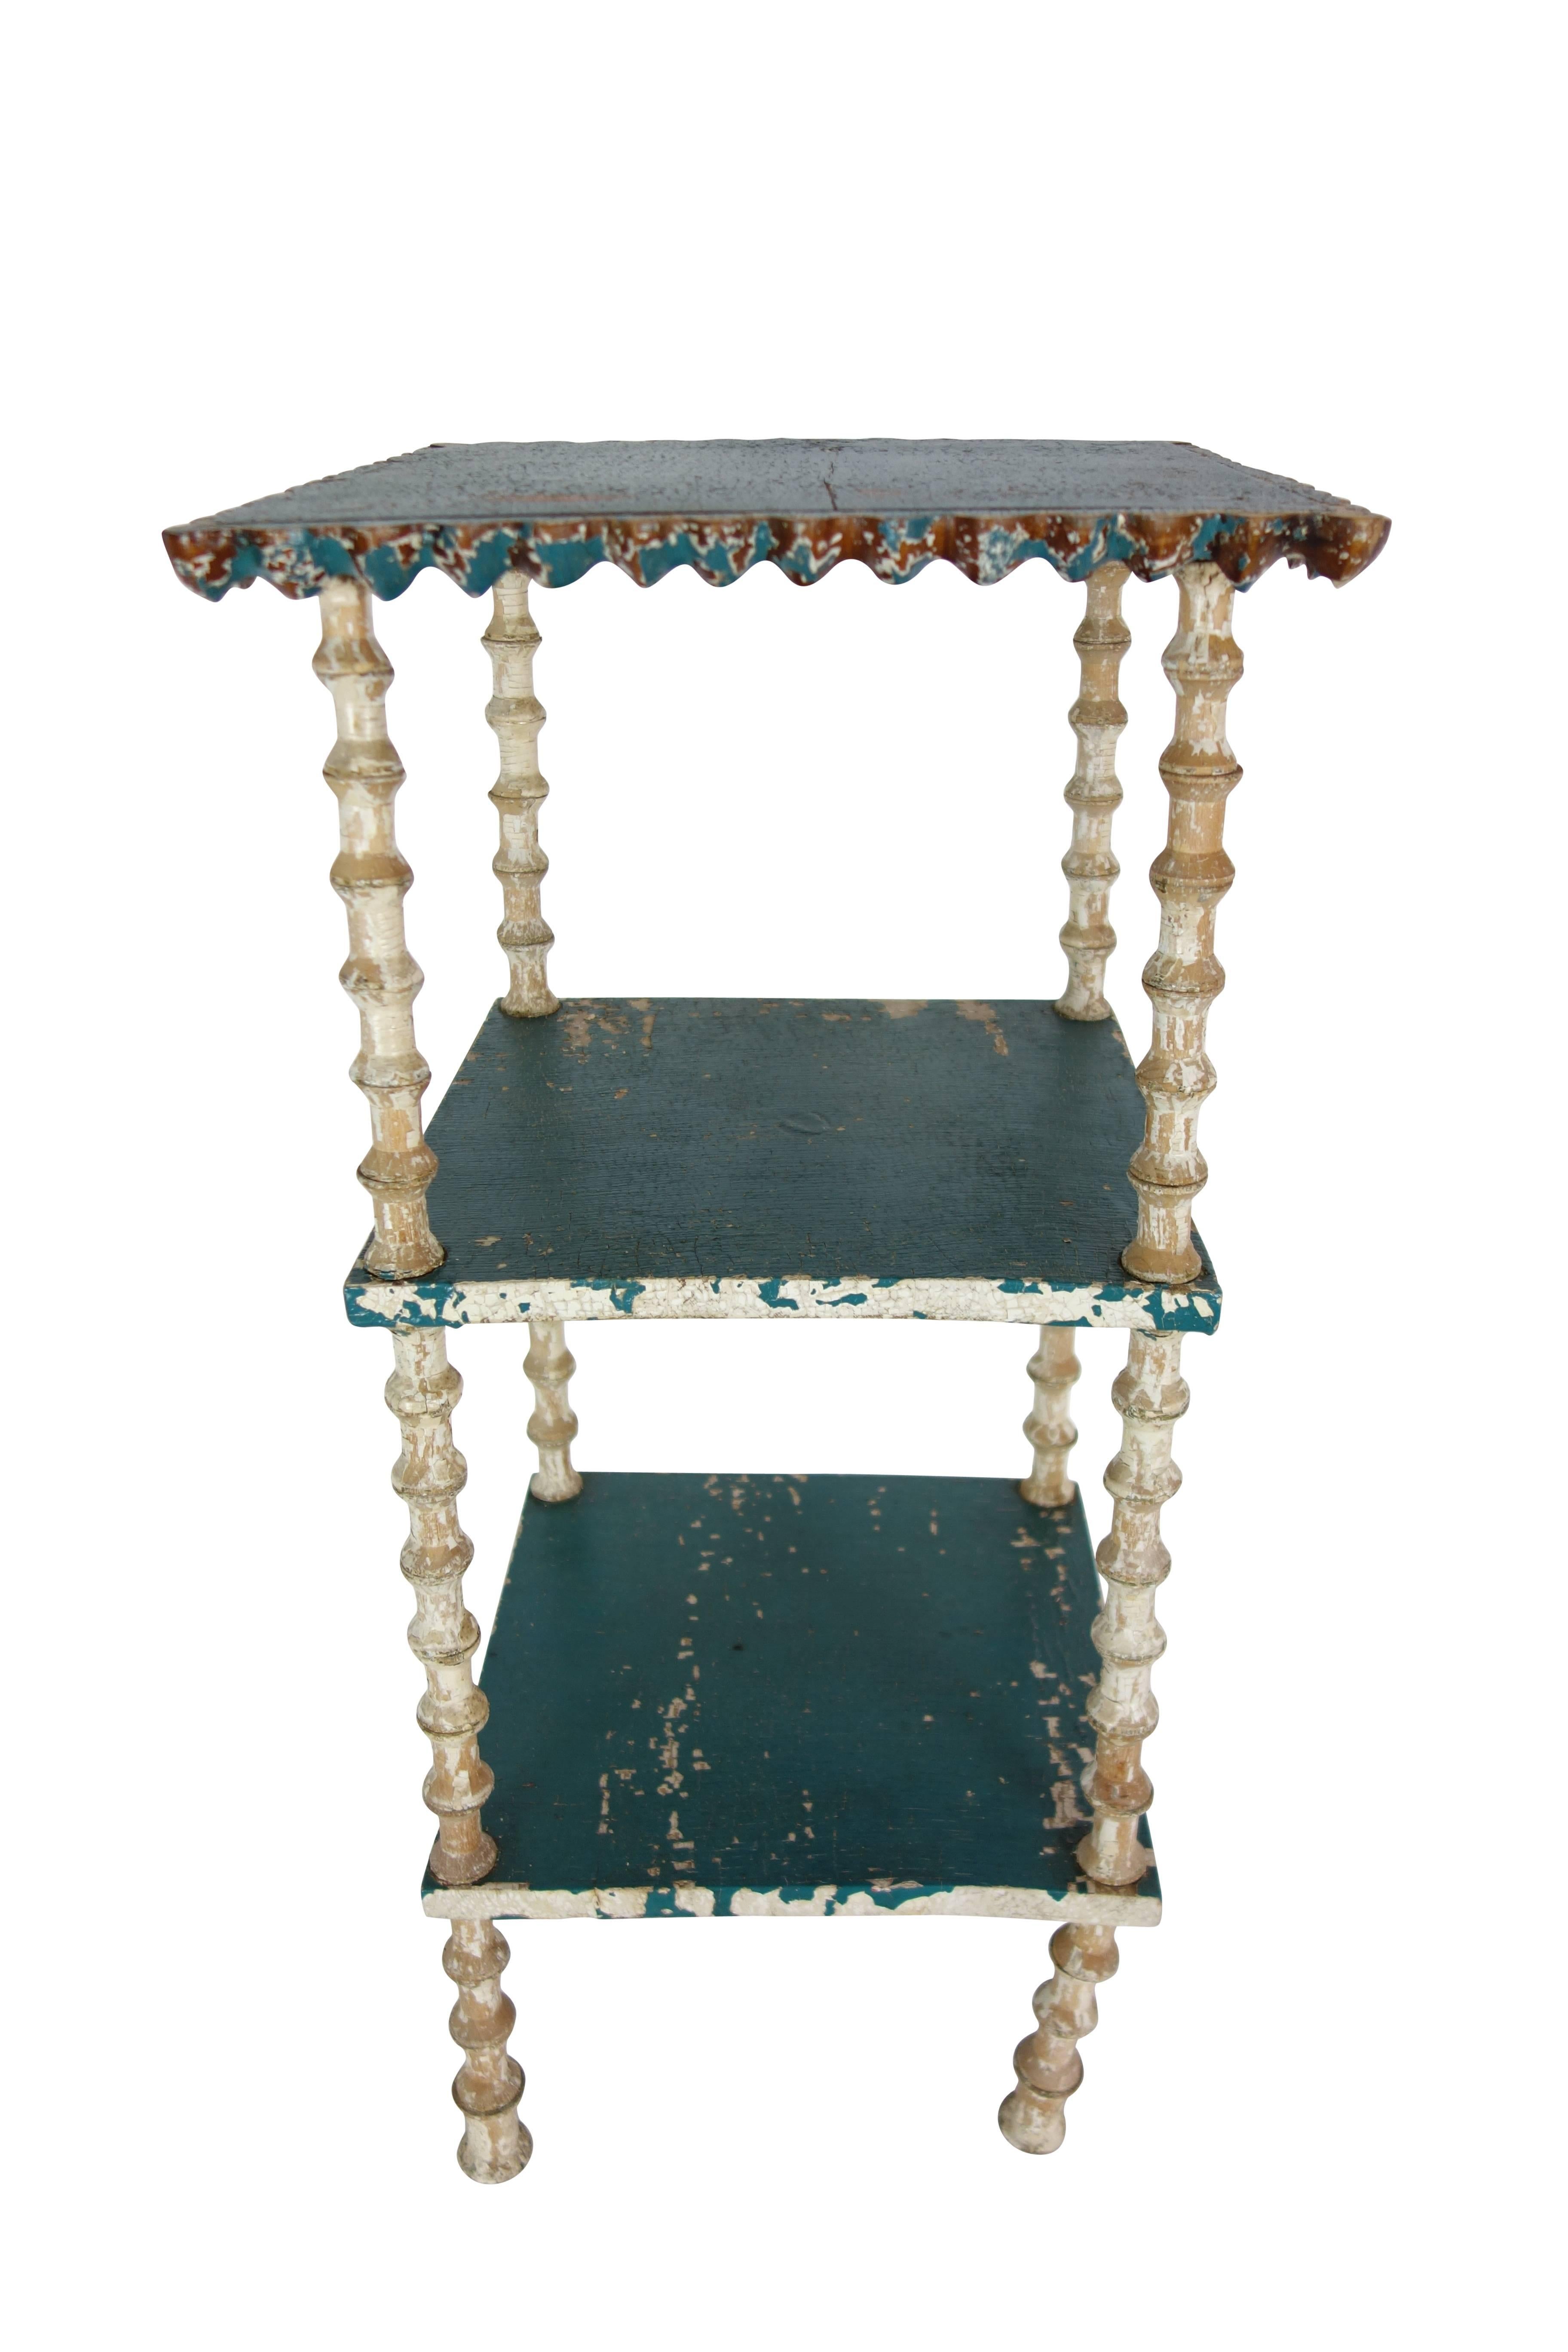 19th Century Painted Three-Tiered Spool Side Table with Turtle on Underside, Dated 1895